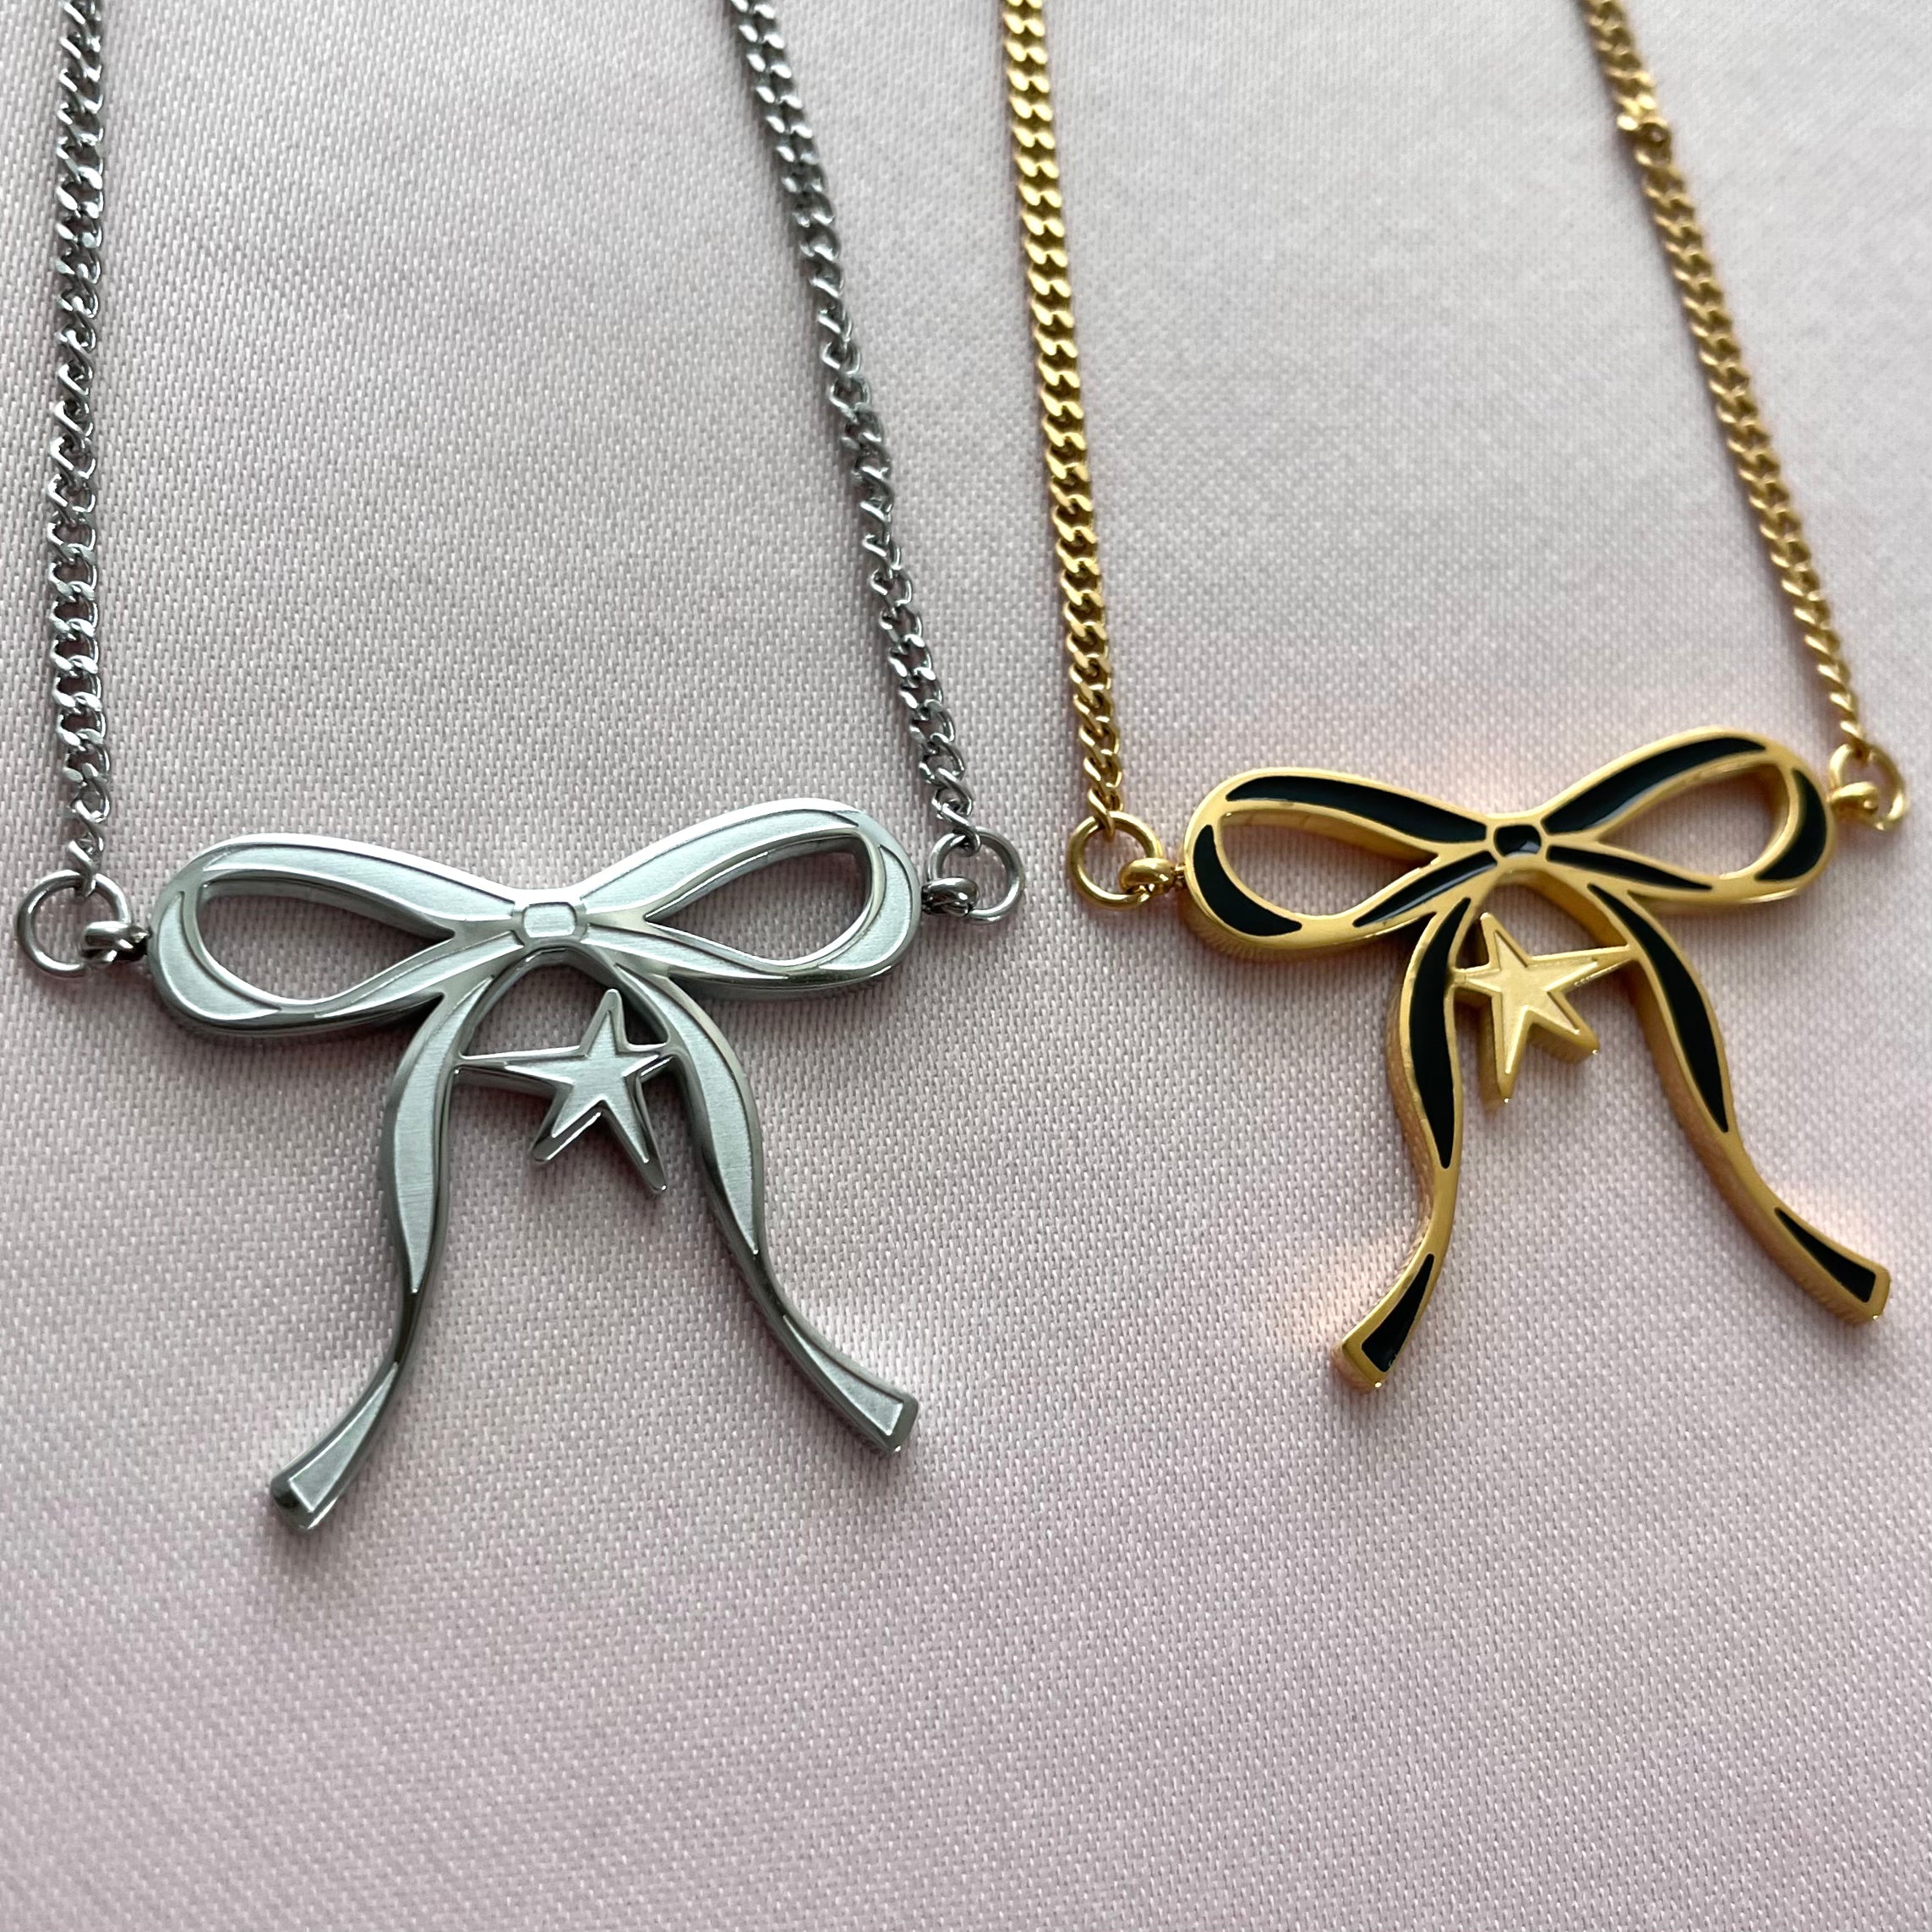 Starry Bow Necklace